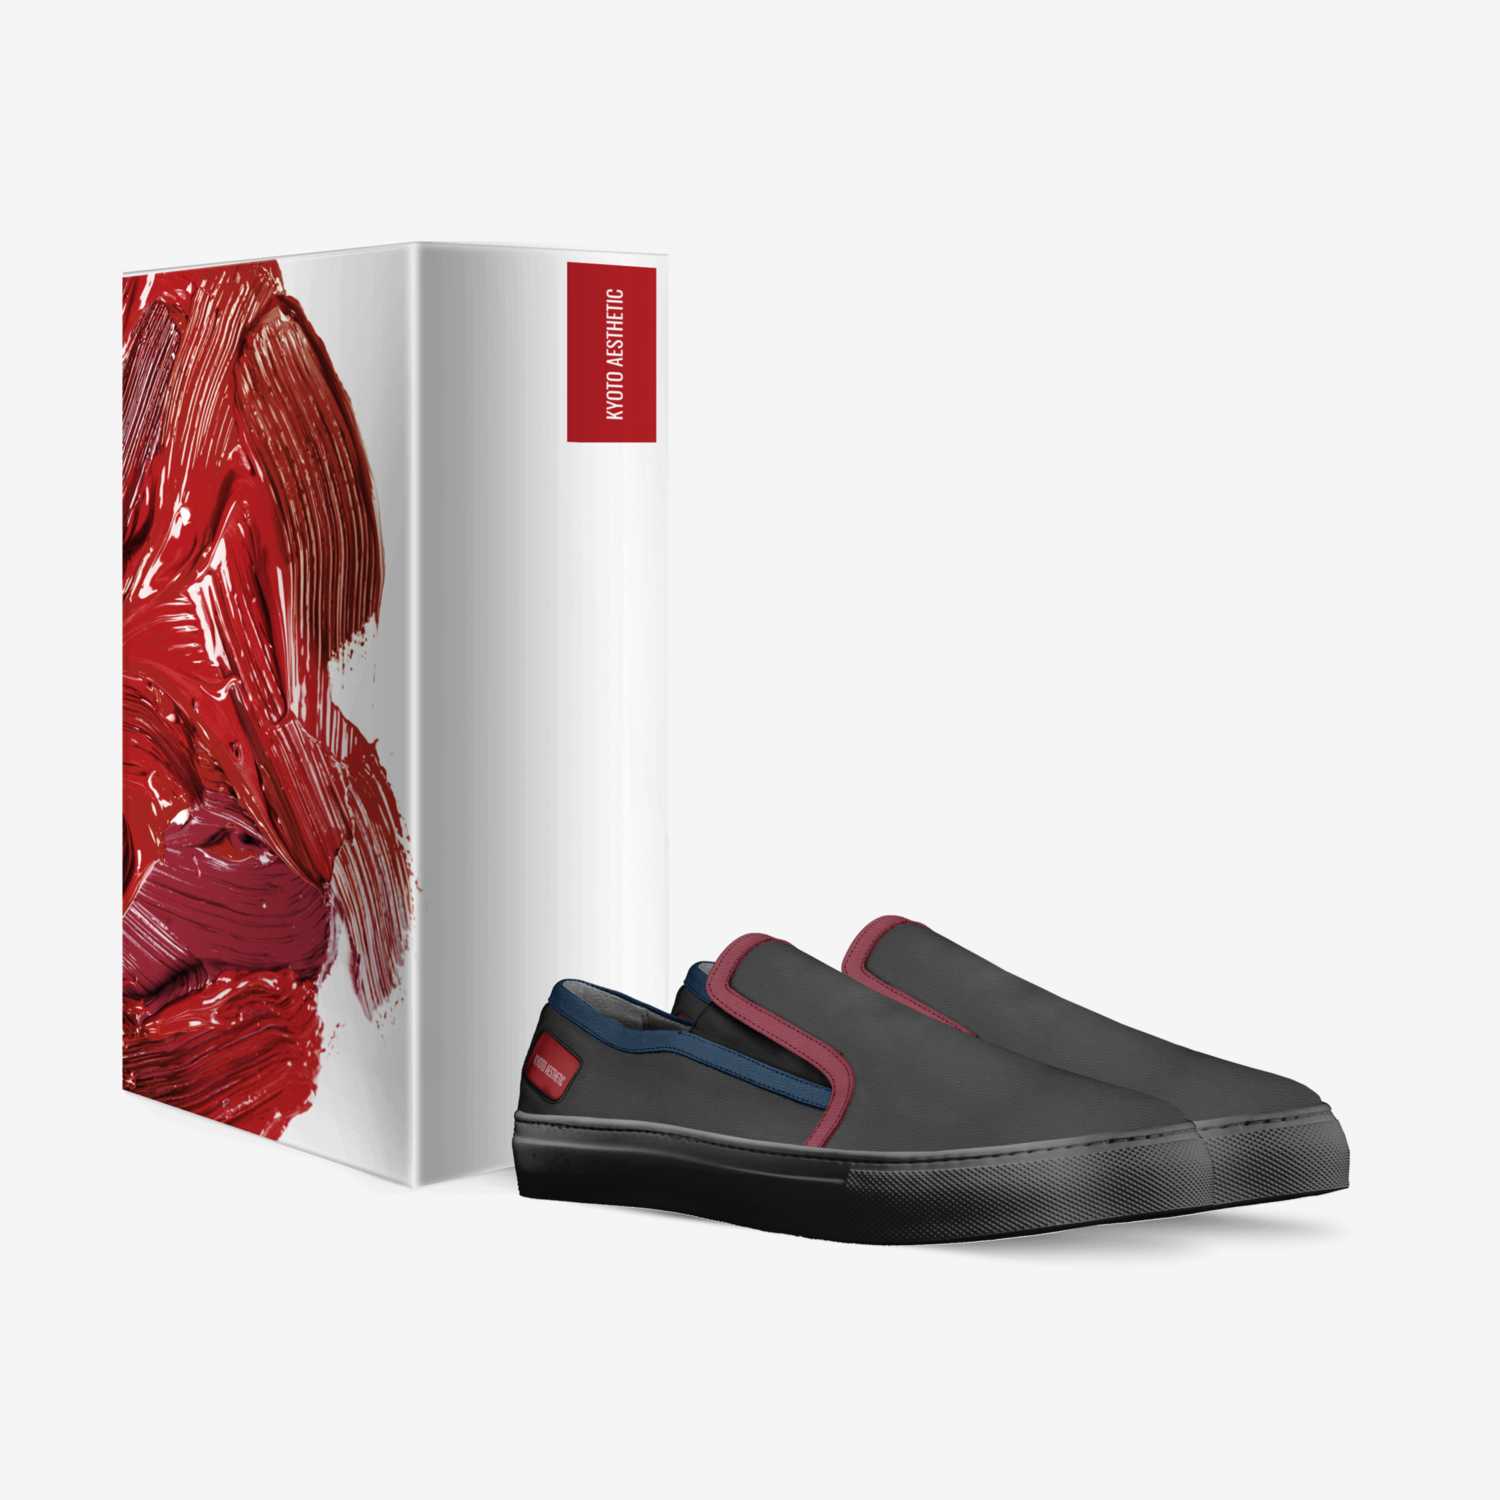 Kyoto Aesthetic custom made in Italy shoes by Ori Abreu | Box view